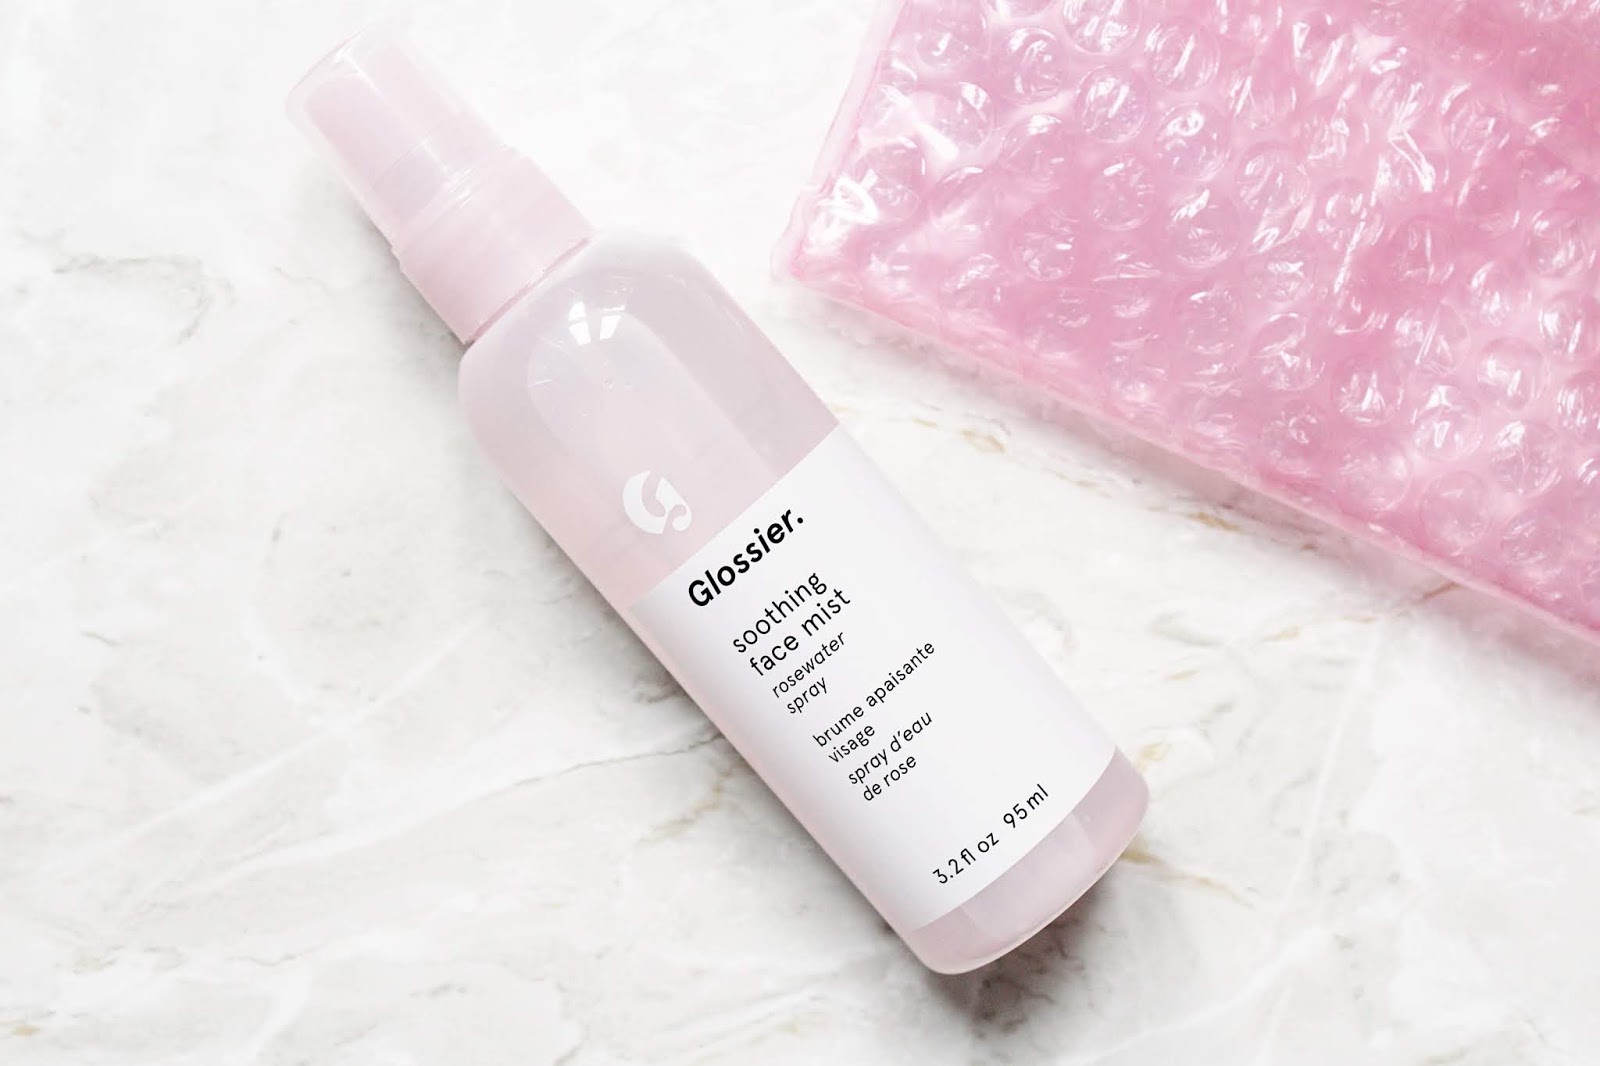 Glossier Soothing Face Mist Review